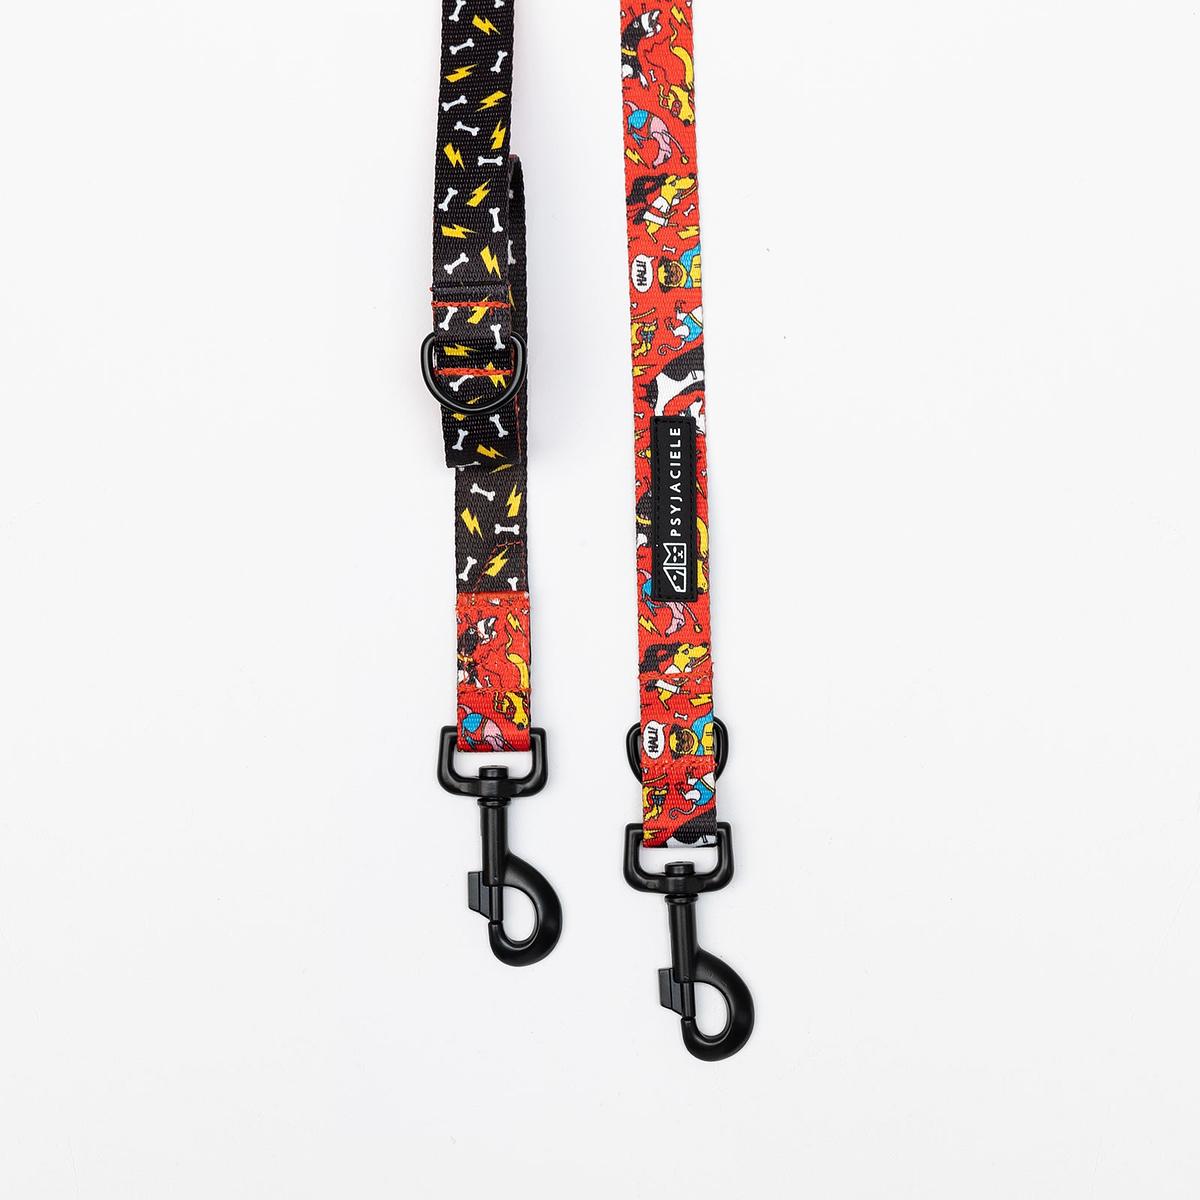 "Woof for the better world" leash